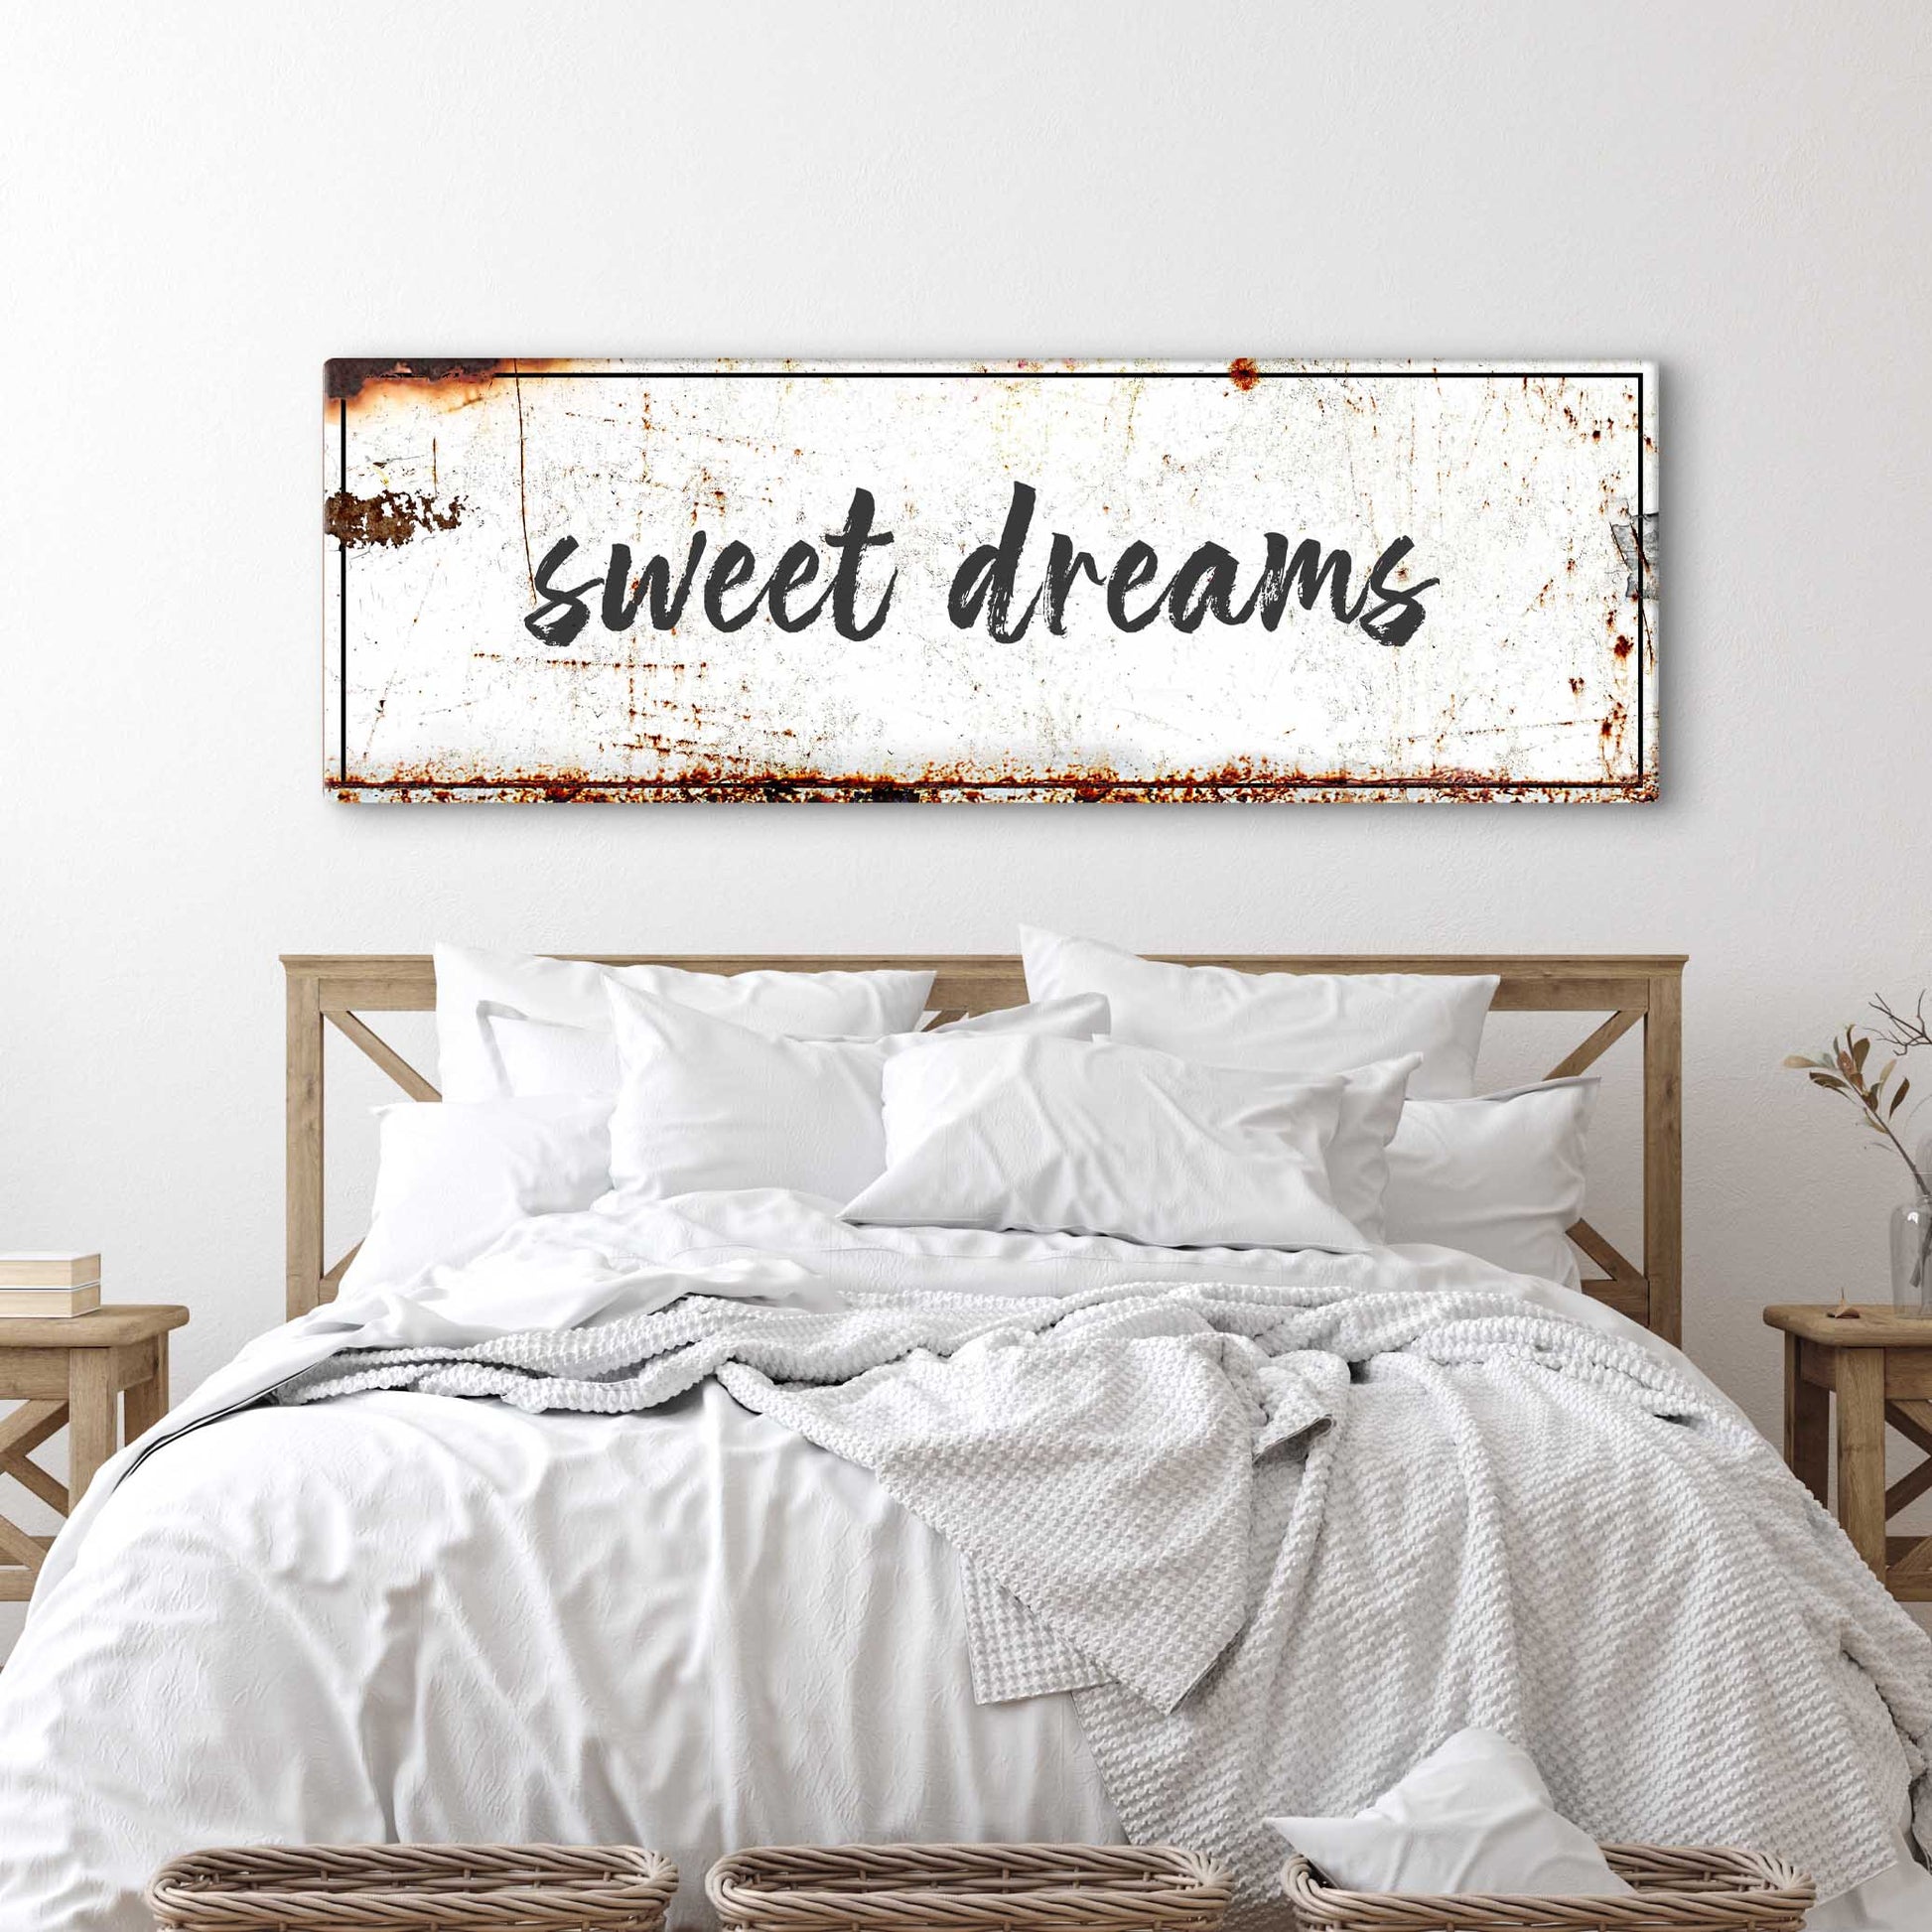 Sweet Dreams Sign - Image by Tailored Canvases